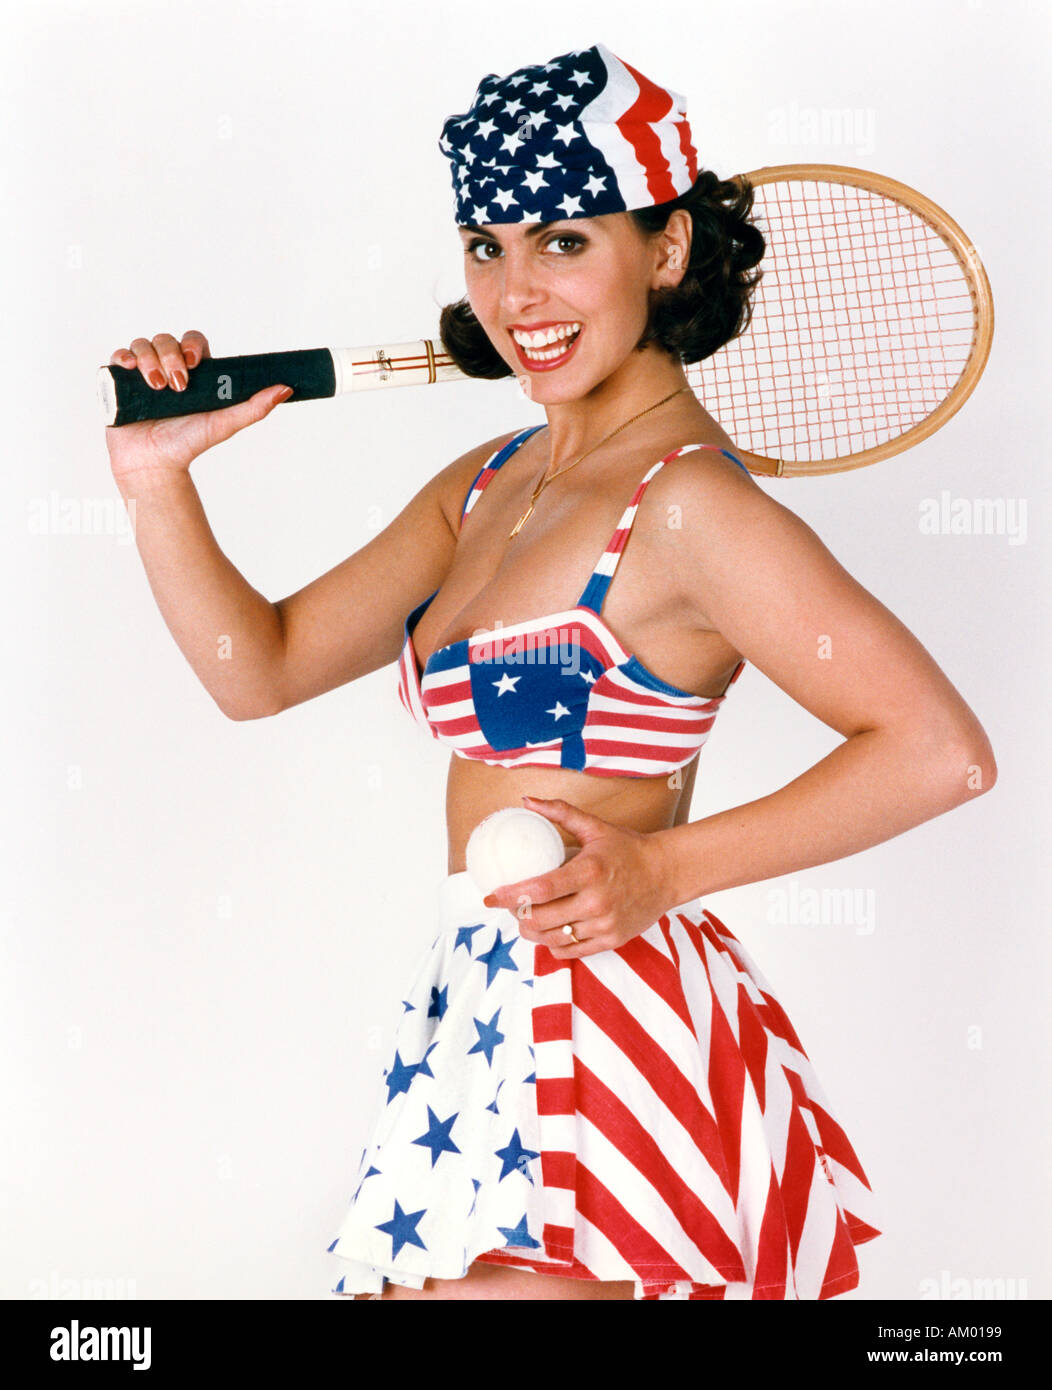 Girl in USA Tennis Outfit and a Tennis Raquet Stock Photo